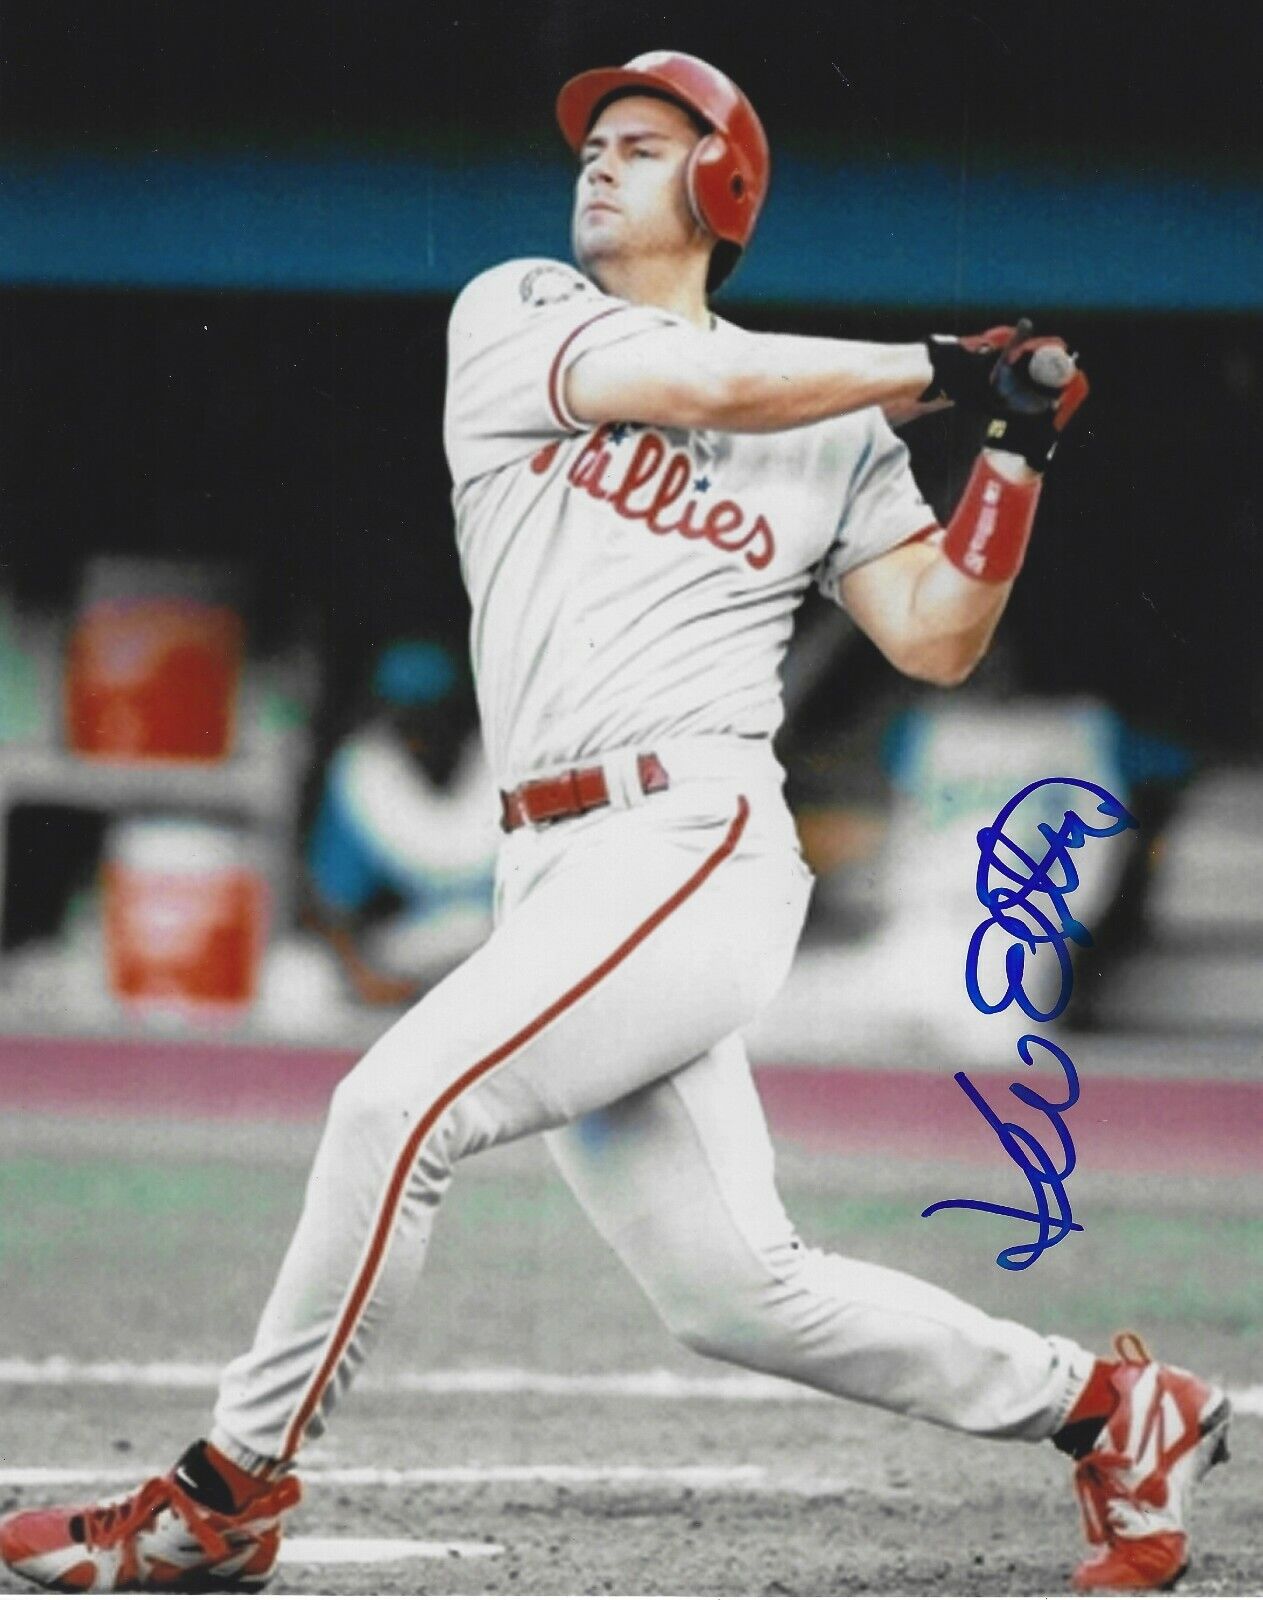 Signed 8x10 KEVIN ELSTER Philadelphia Phillies Autographed Photo Poster painting - COA